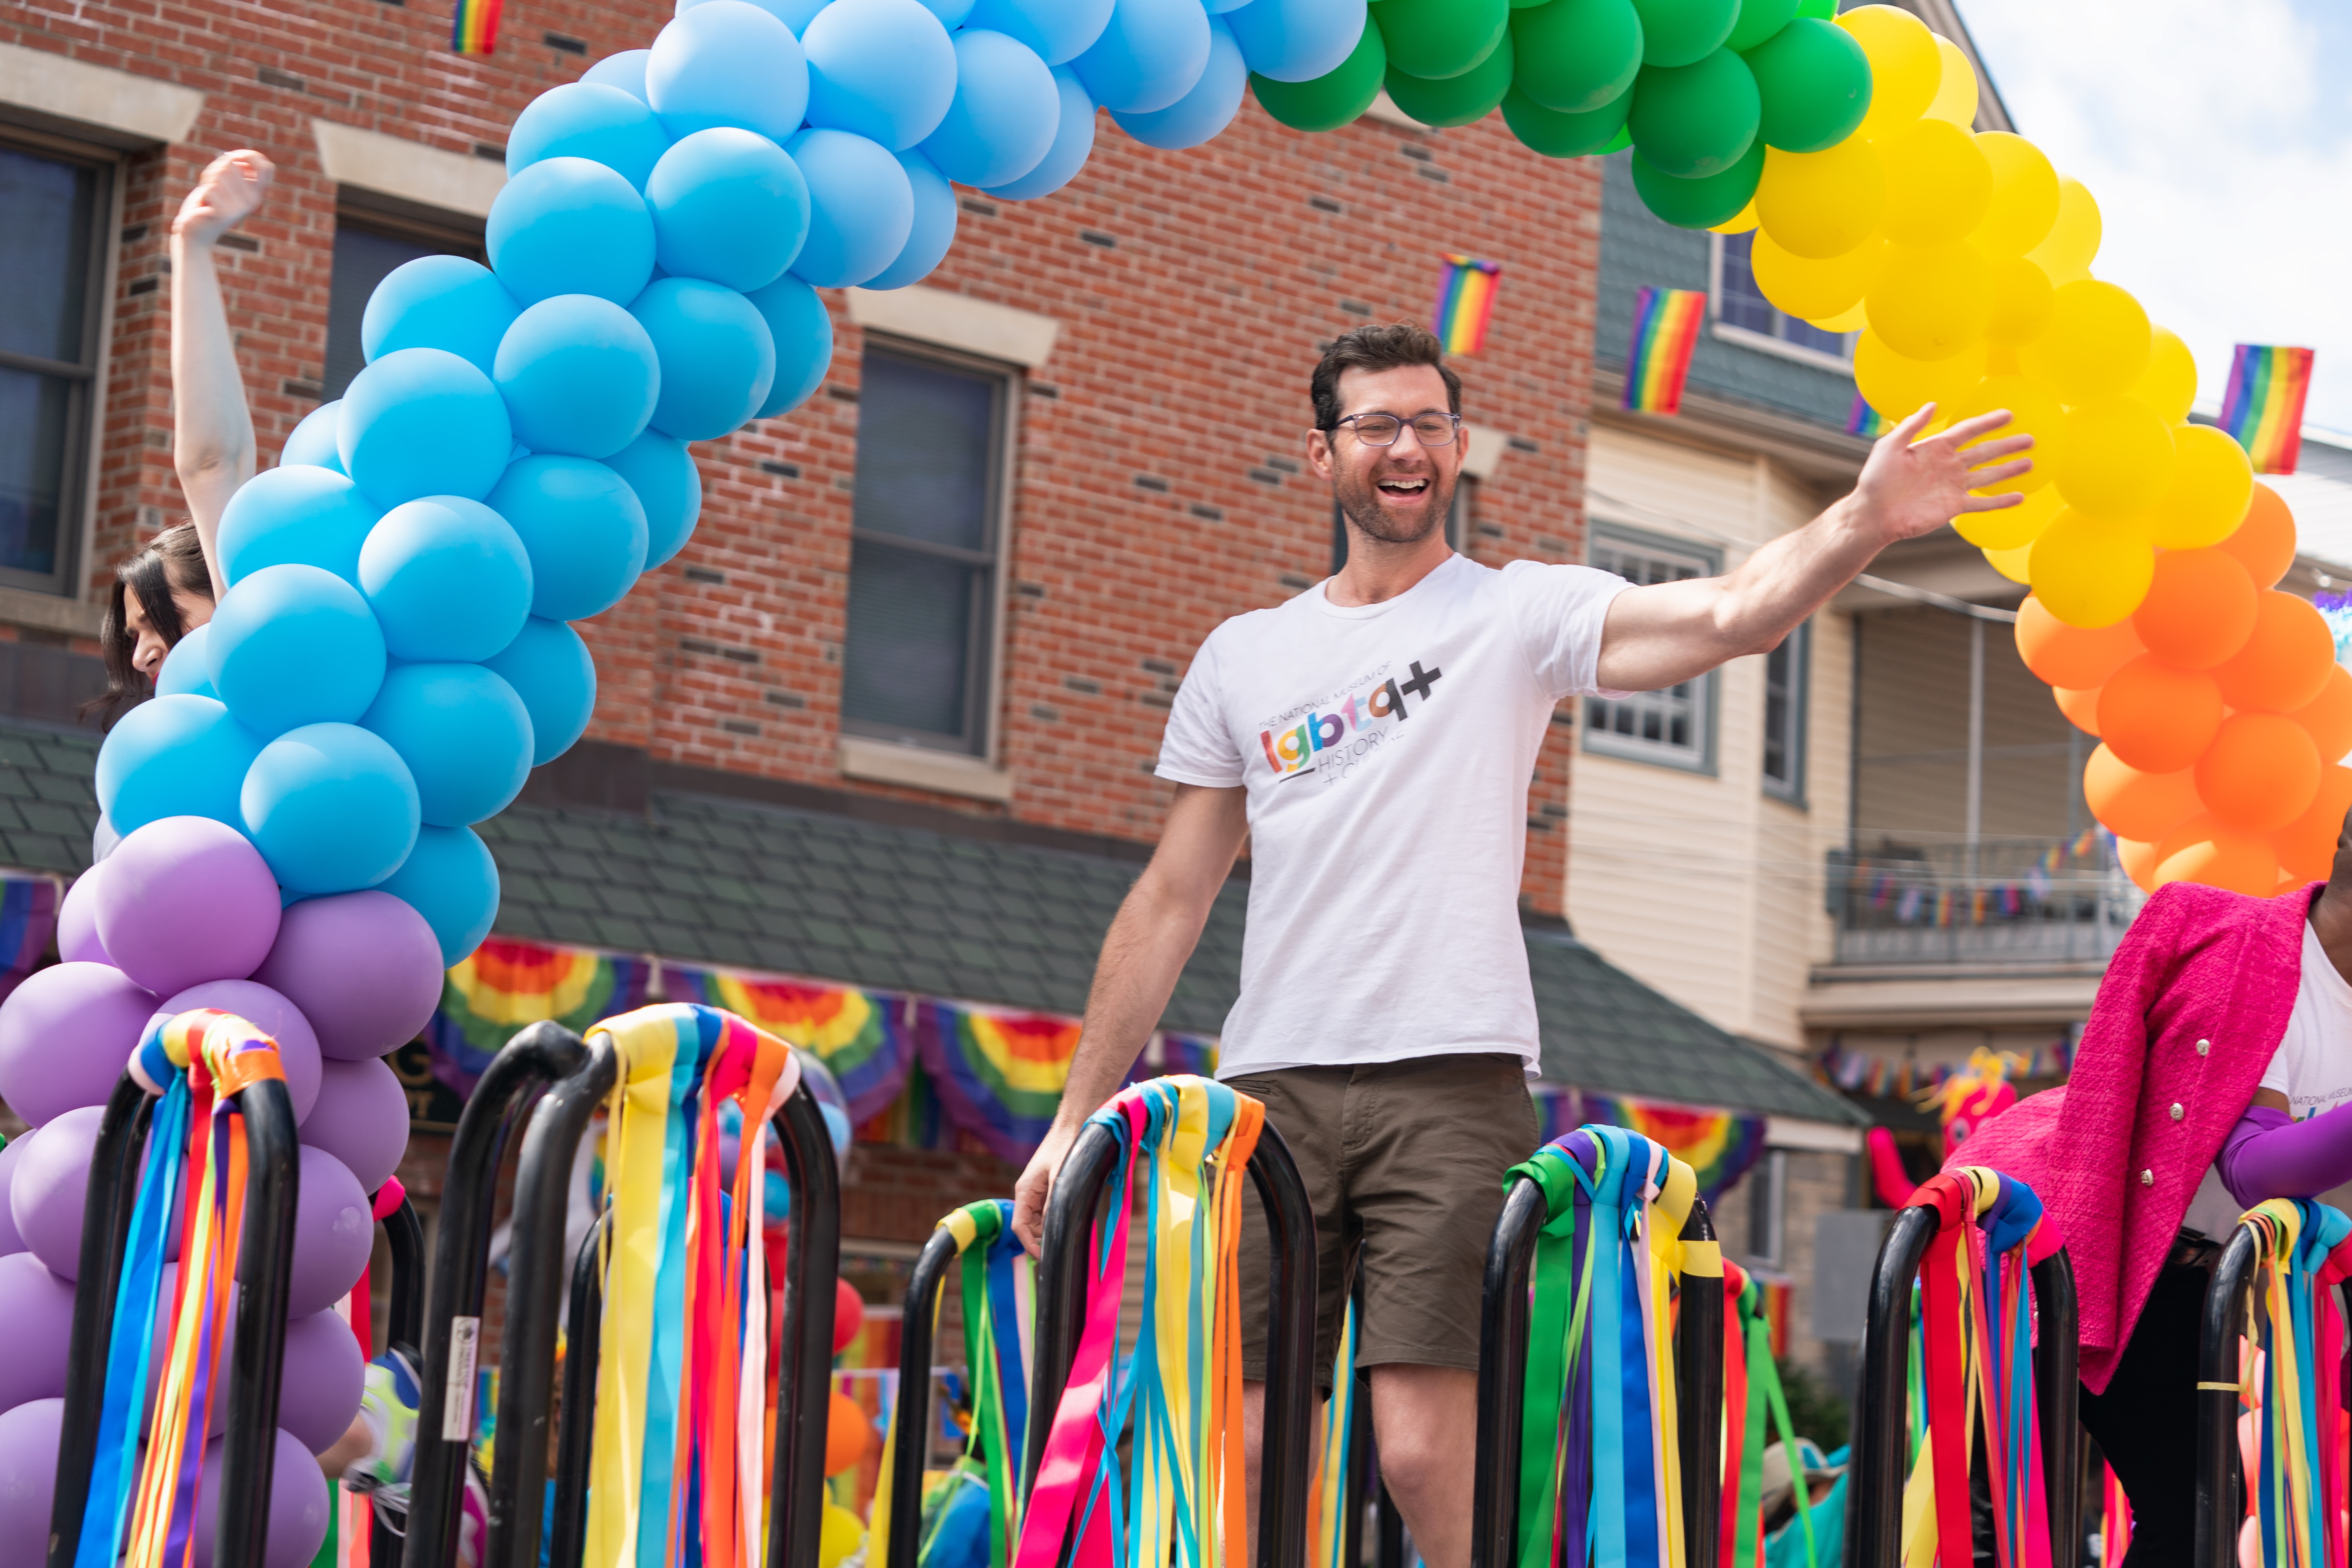 Bobby (Billy Eichner) stands on a parade float decorated with a rainbow balloon arch and rainbow streamers as he waves to the crowd in his “LGBTQ History” t-shirt